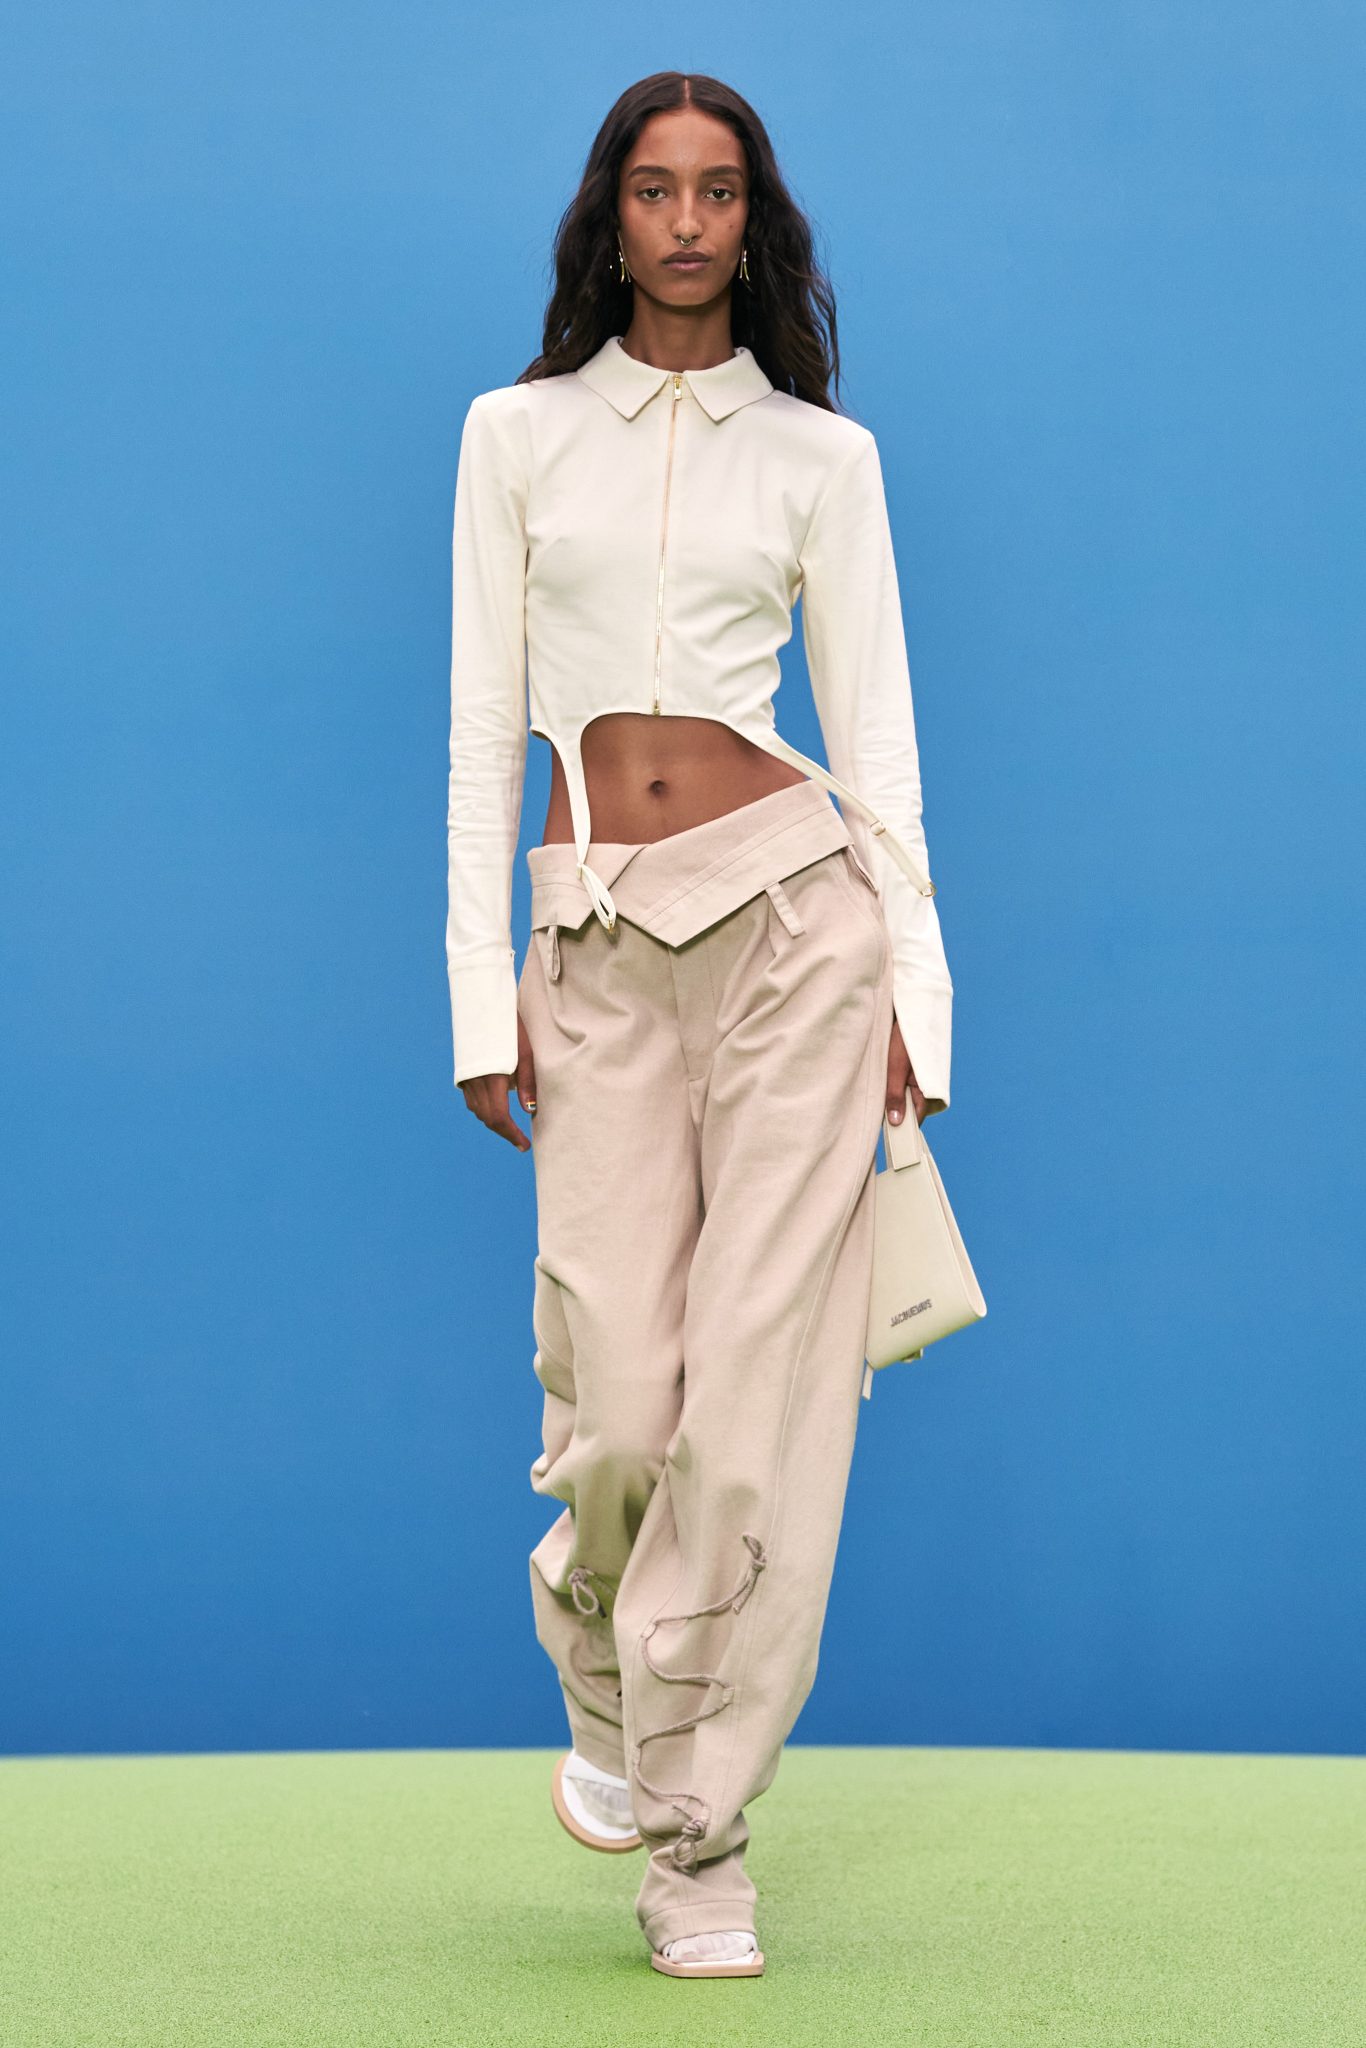 Jacquemus Spring 2021 Ready-to-Wear Fashion Show